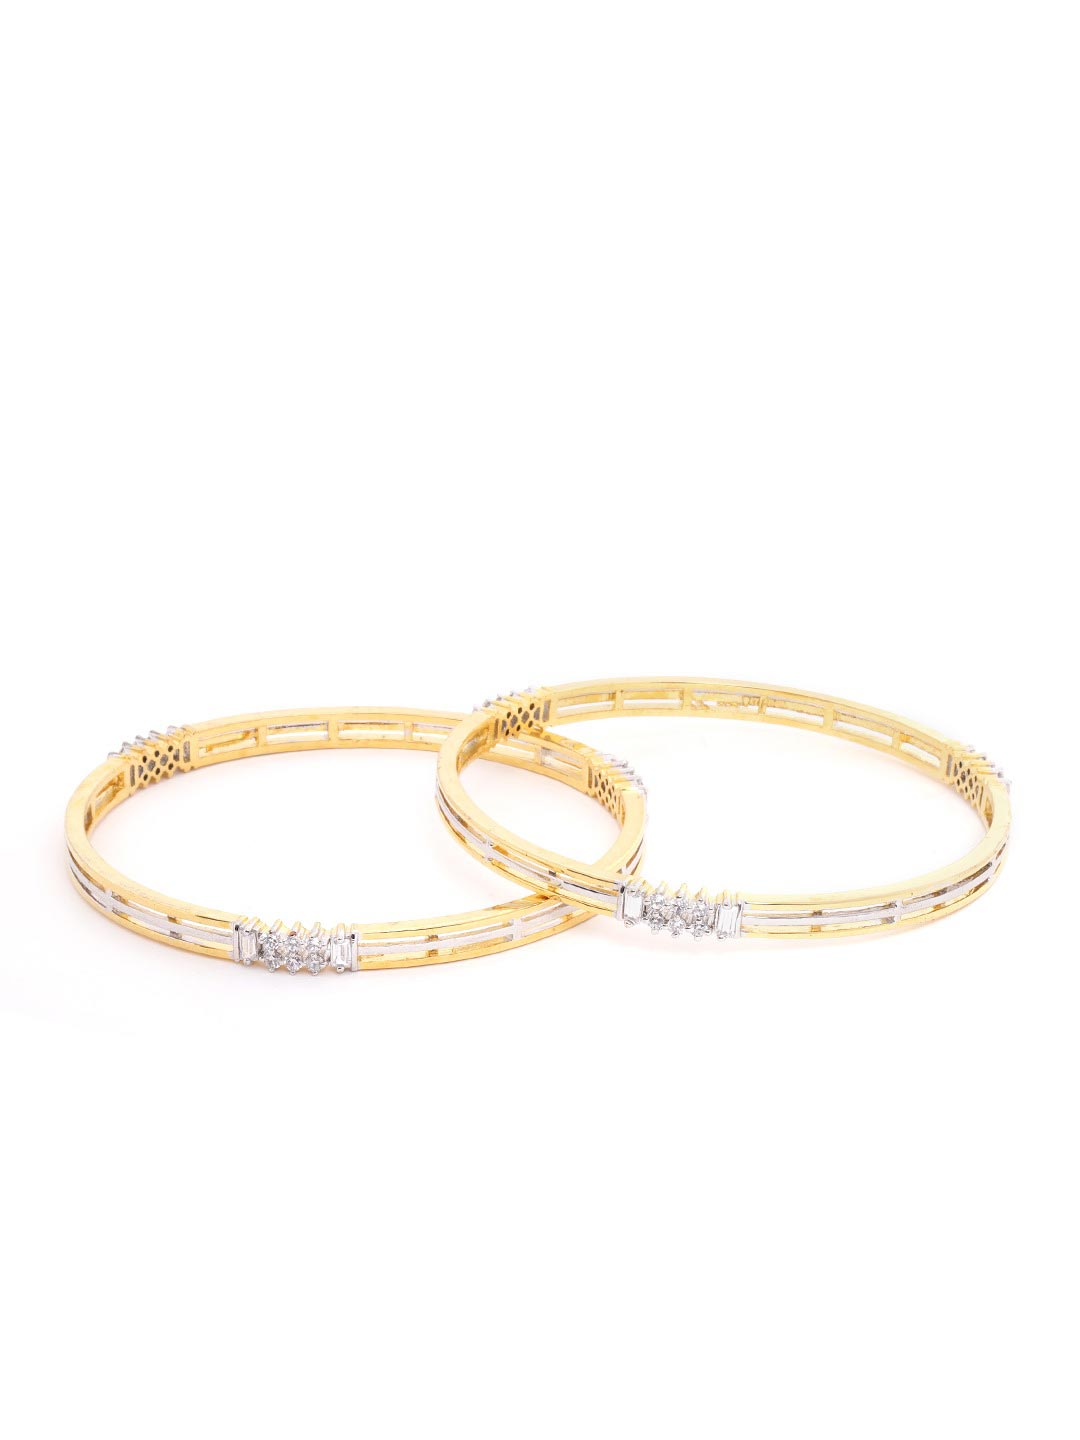 Set of 2 Gold and Silver Plated American Diamond Studded Bangles